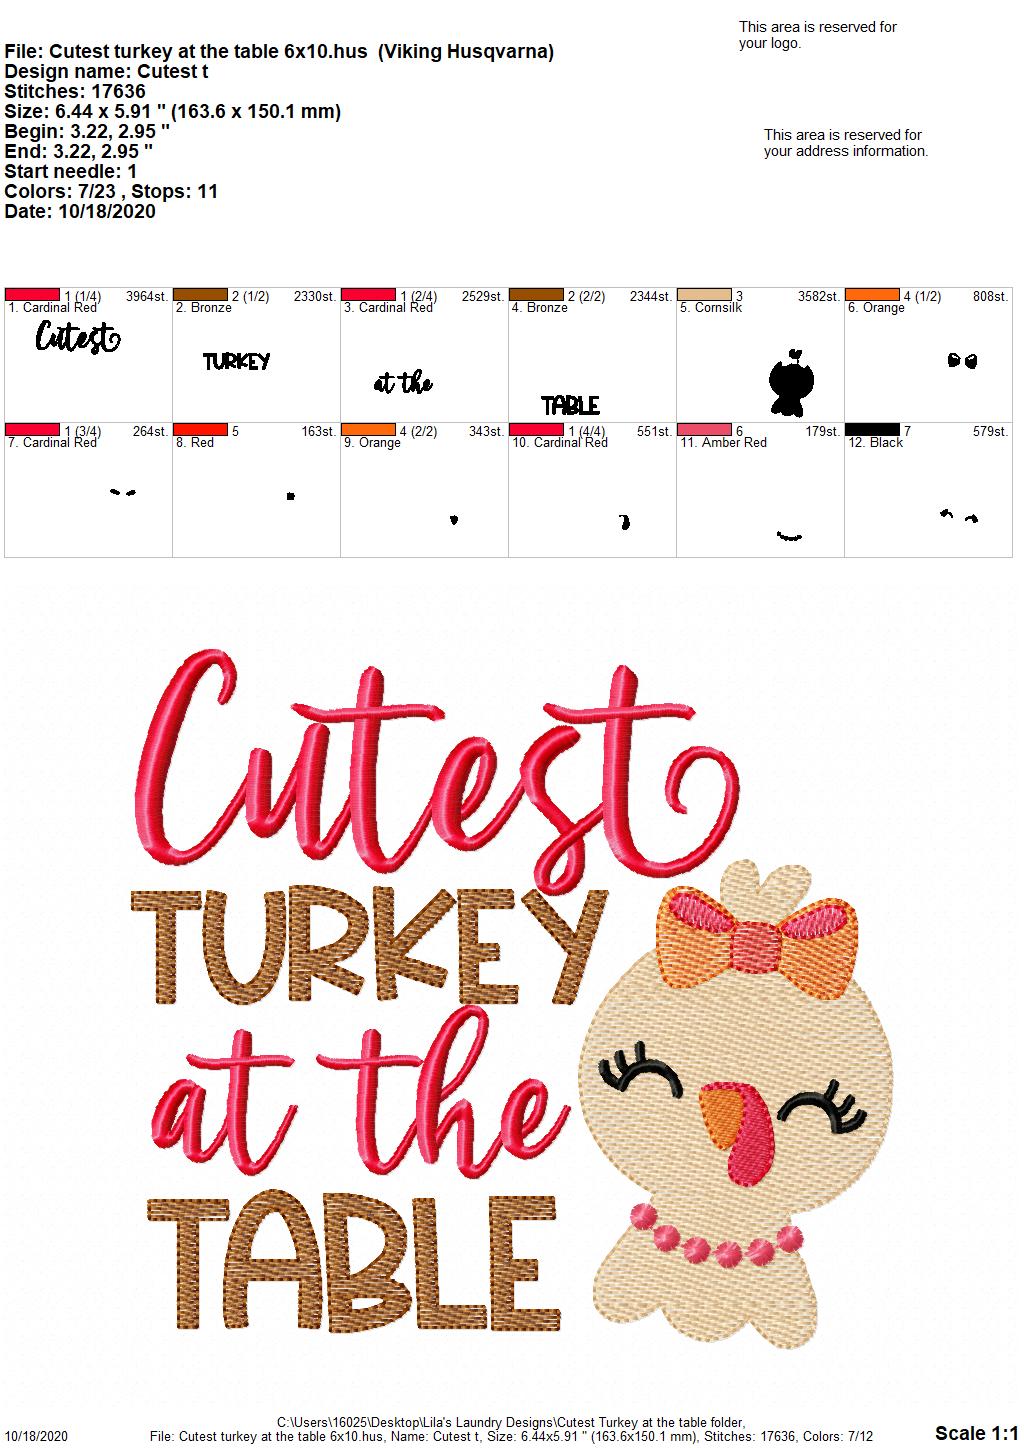 Cutest Turkey At The Table - 3 Sizes - Digital Embroidery Design